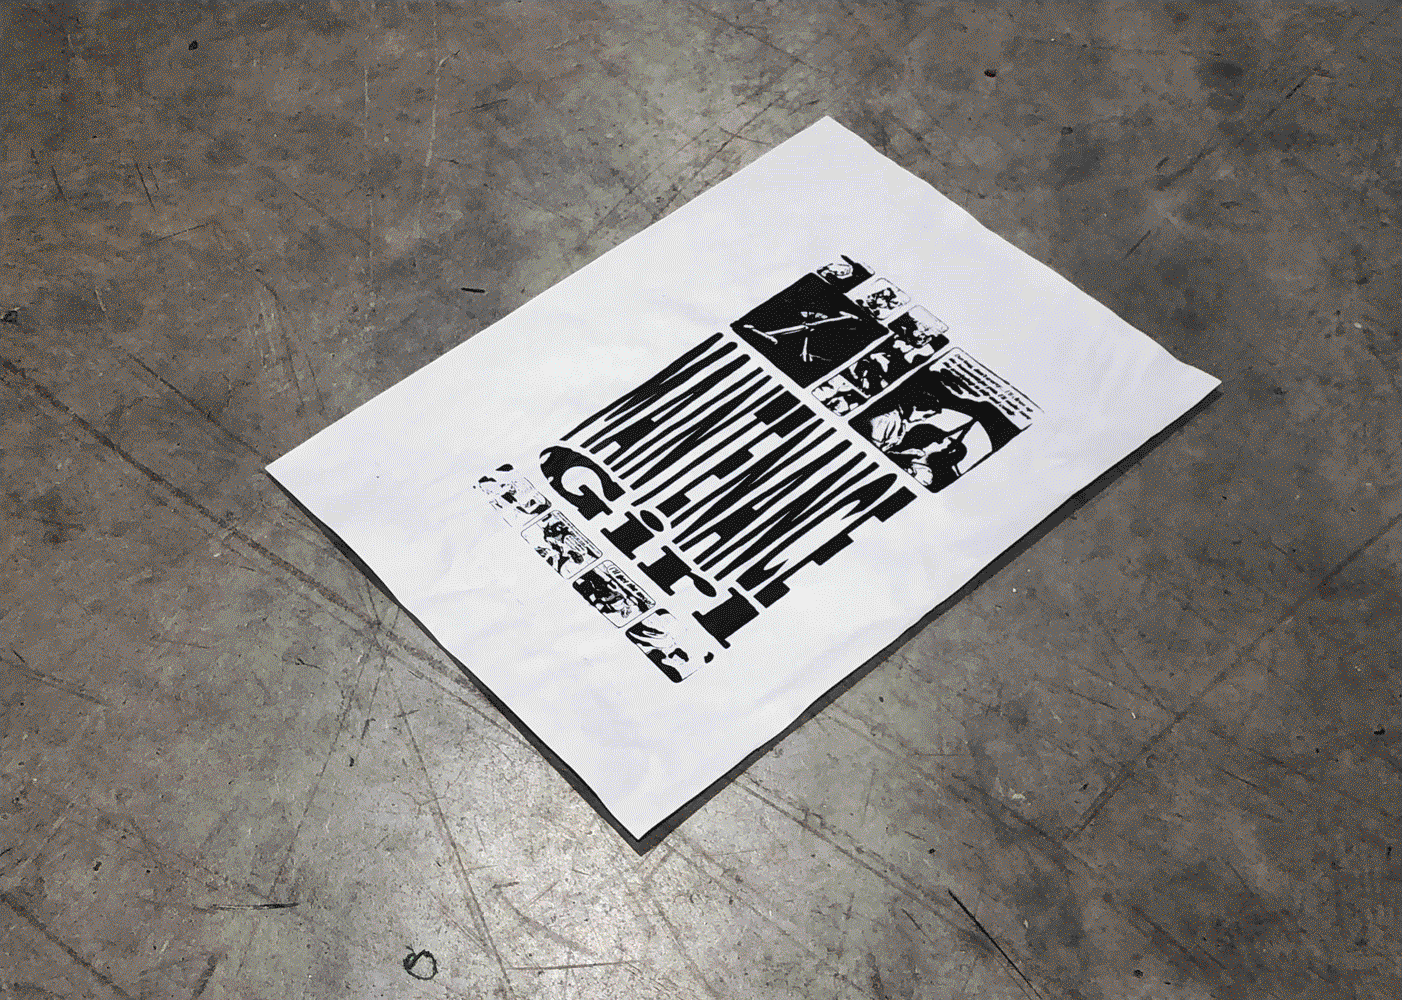 a piece of newsprint, screenprinted with graphics (stretched text and  comics) in black ink, on a concrete floor.